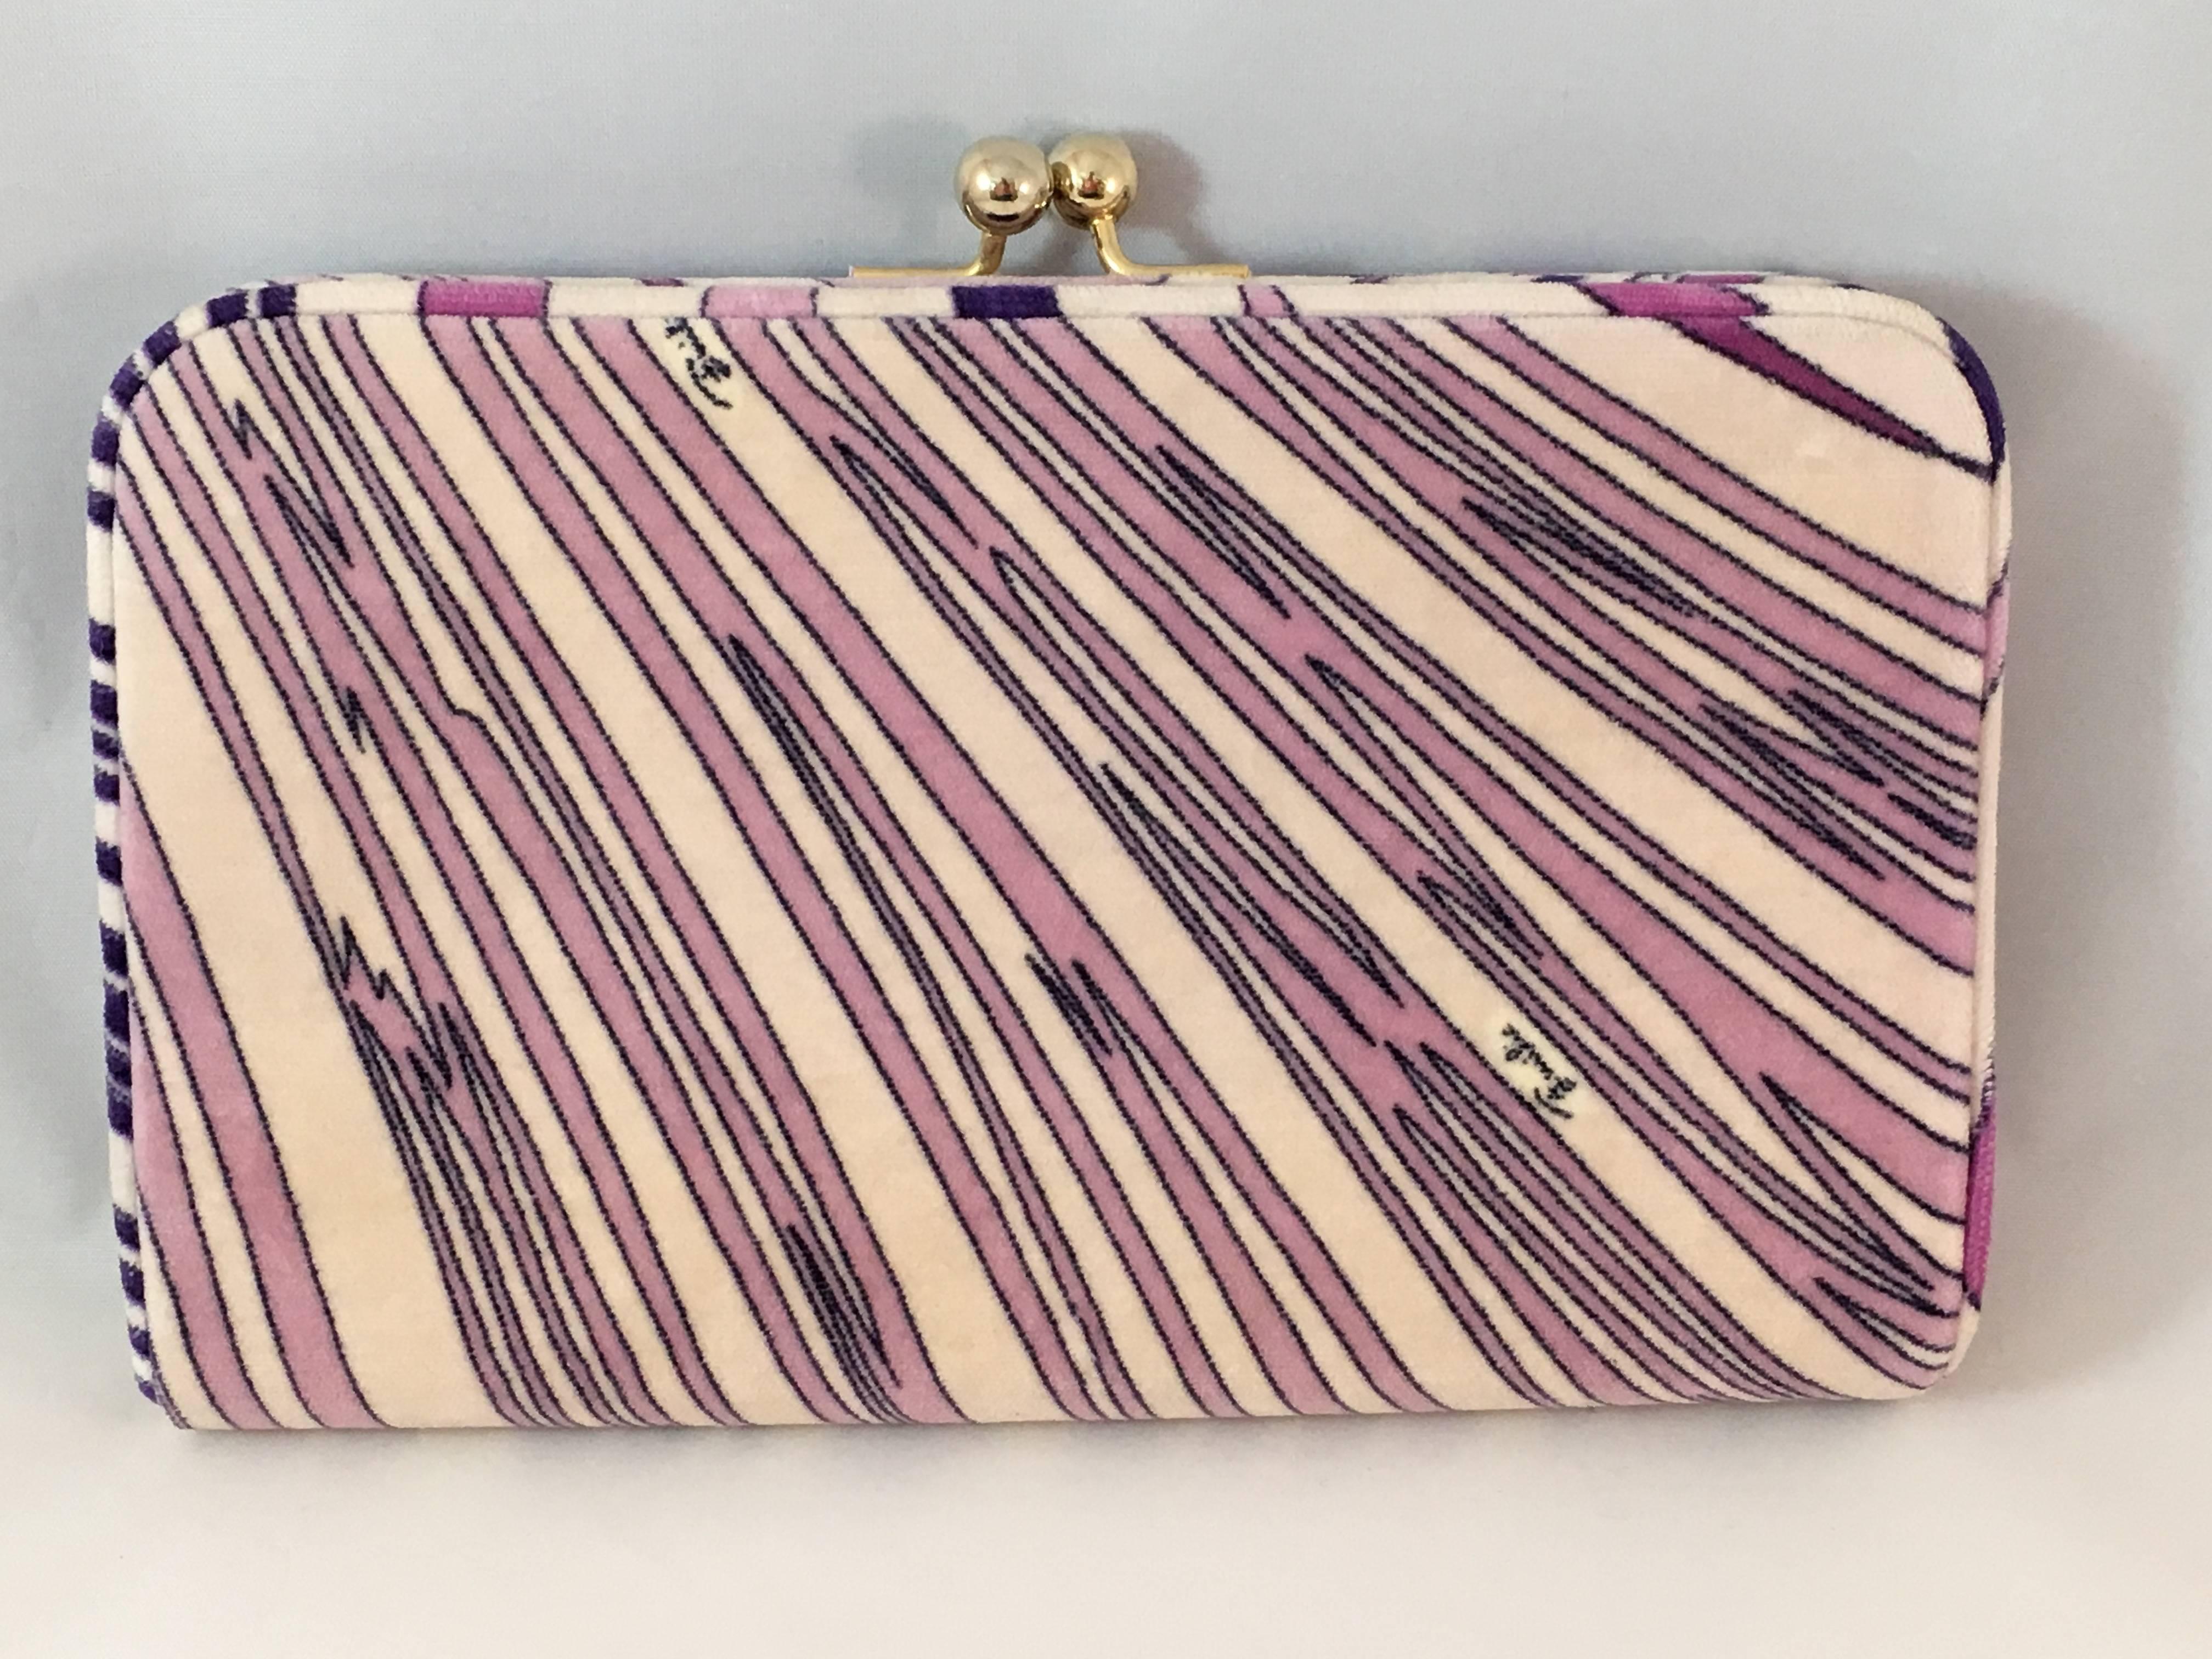 Gorgeous Pucci printed velvet clutch from the 1960's in excellent condition. All-over geometric print in shades of lilac and pink. The interior is lined in black satin. It closes with a snap closure at the top which is made up of two gold-toned